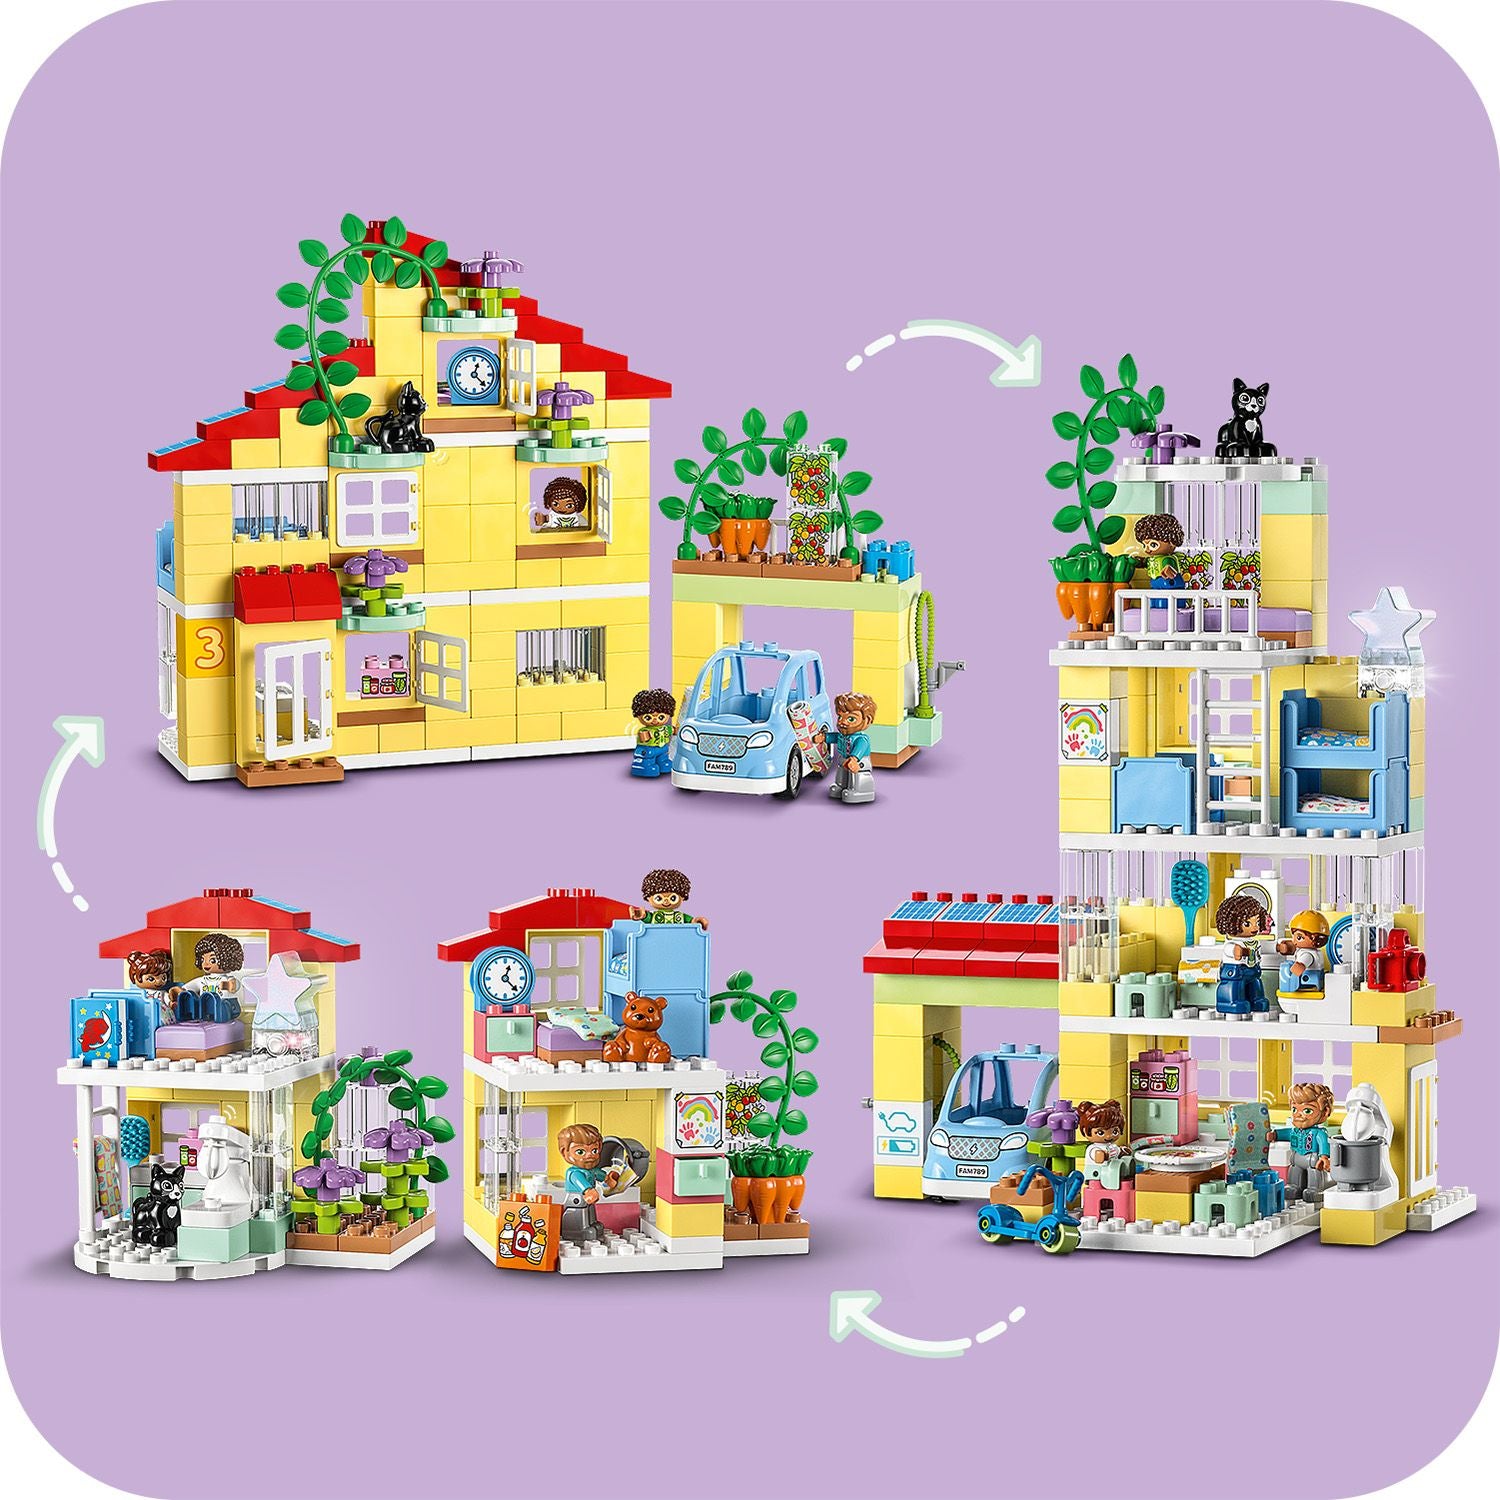 LEGO® DUPLO 3 in 1 Family House Set with Toy Car